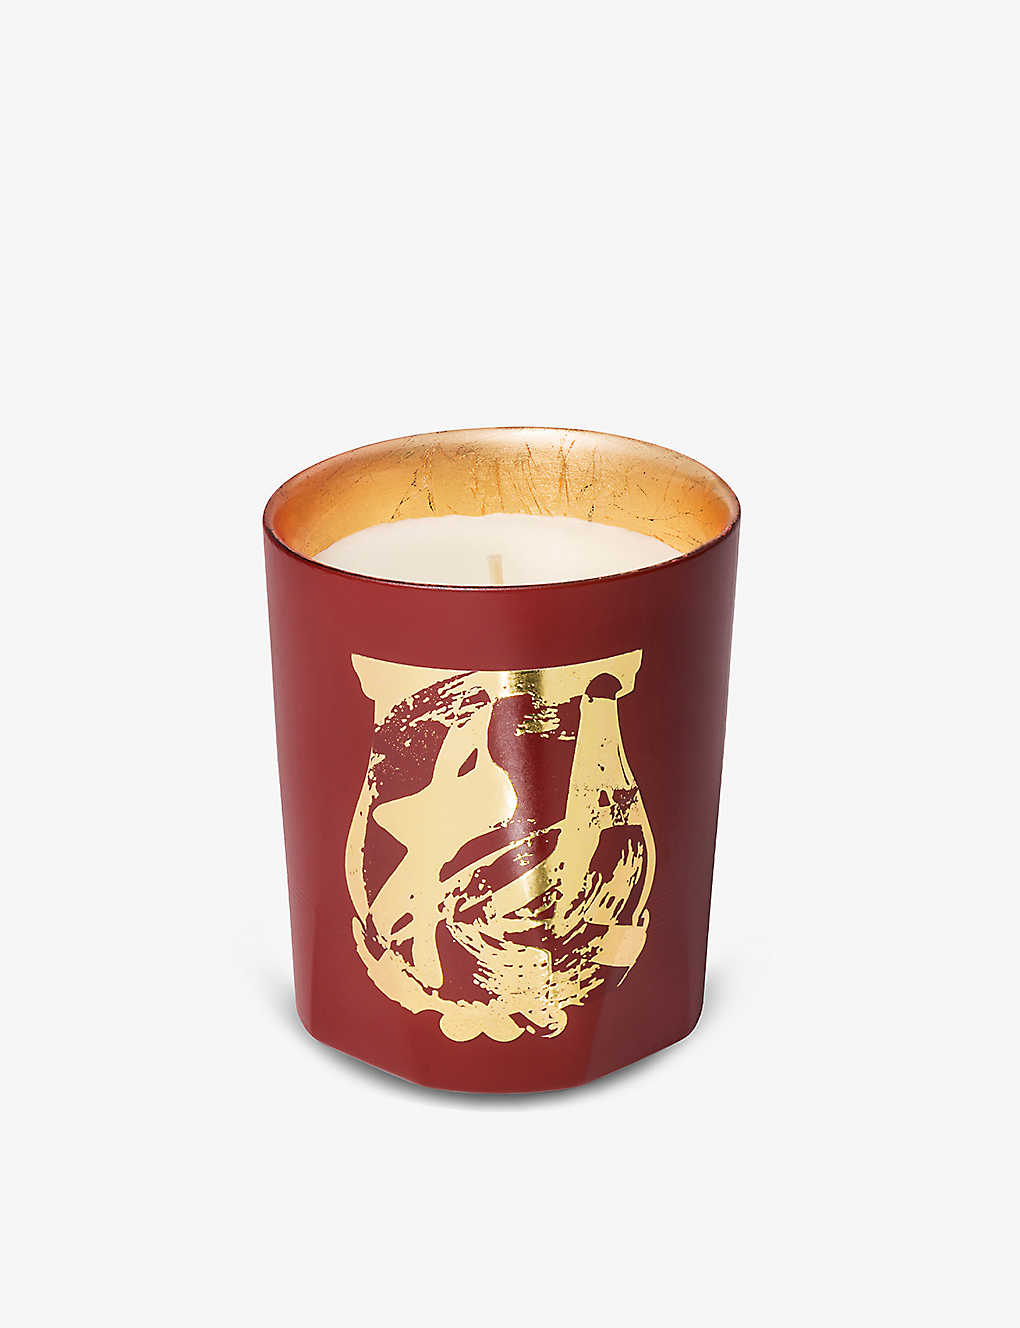 Trudon Master Tseng Earth To Earth Scented Candle 800g